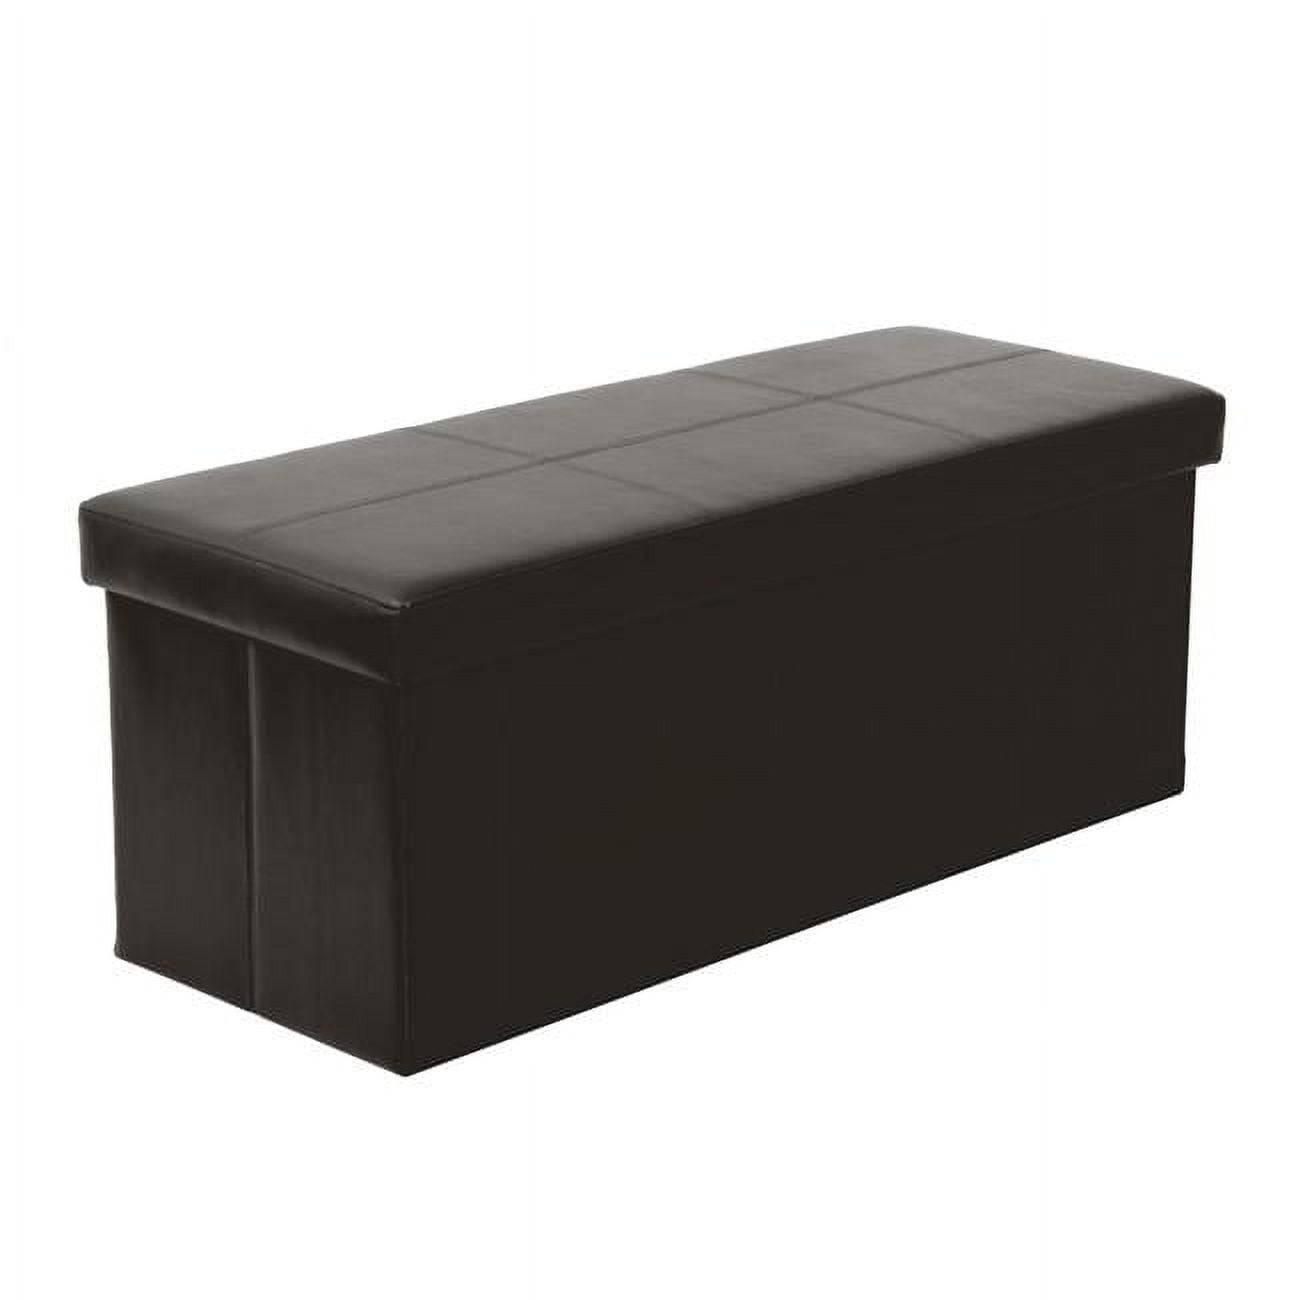 Picture of American Furniture 512 16.75 x 43 x 17.5 in. Classics Model Foldable Tufted Storage Bench, Dark Brown